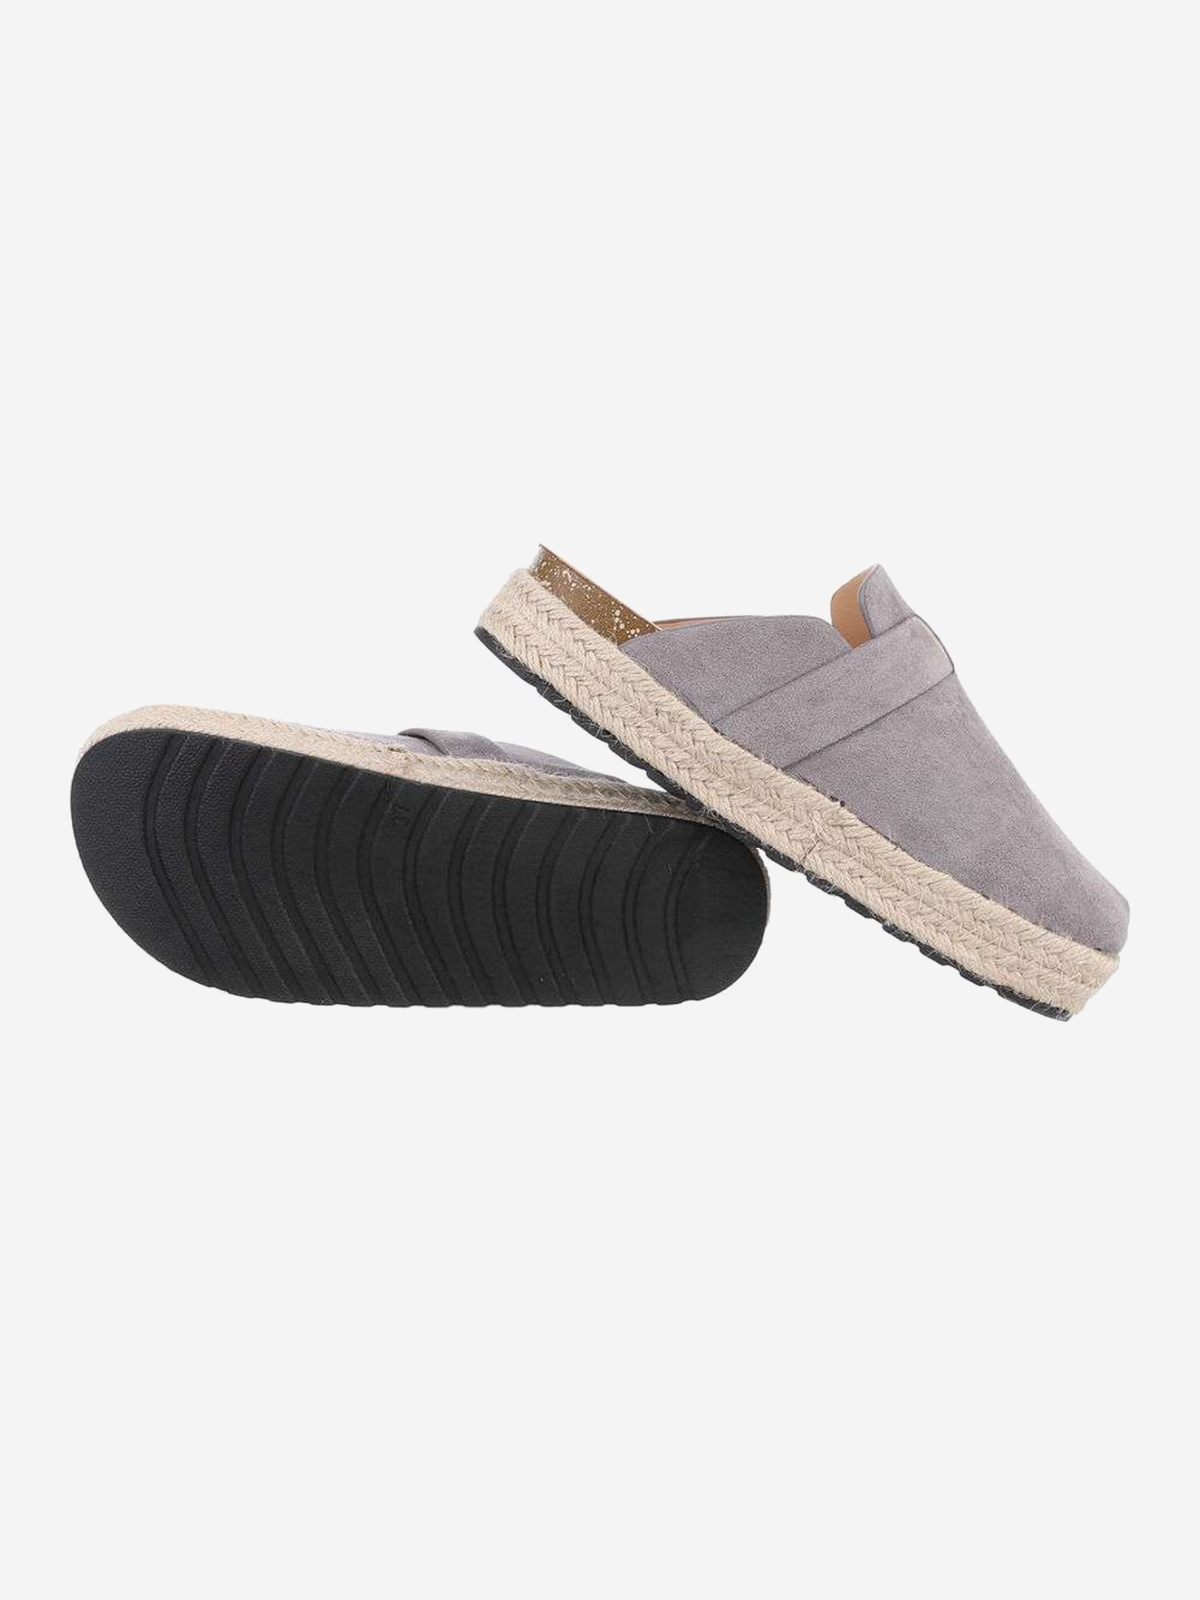 Women's slippers with a thick sole in grey